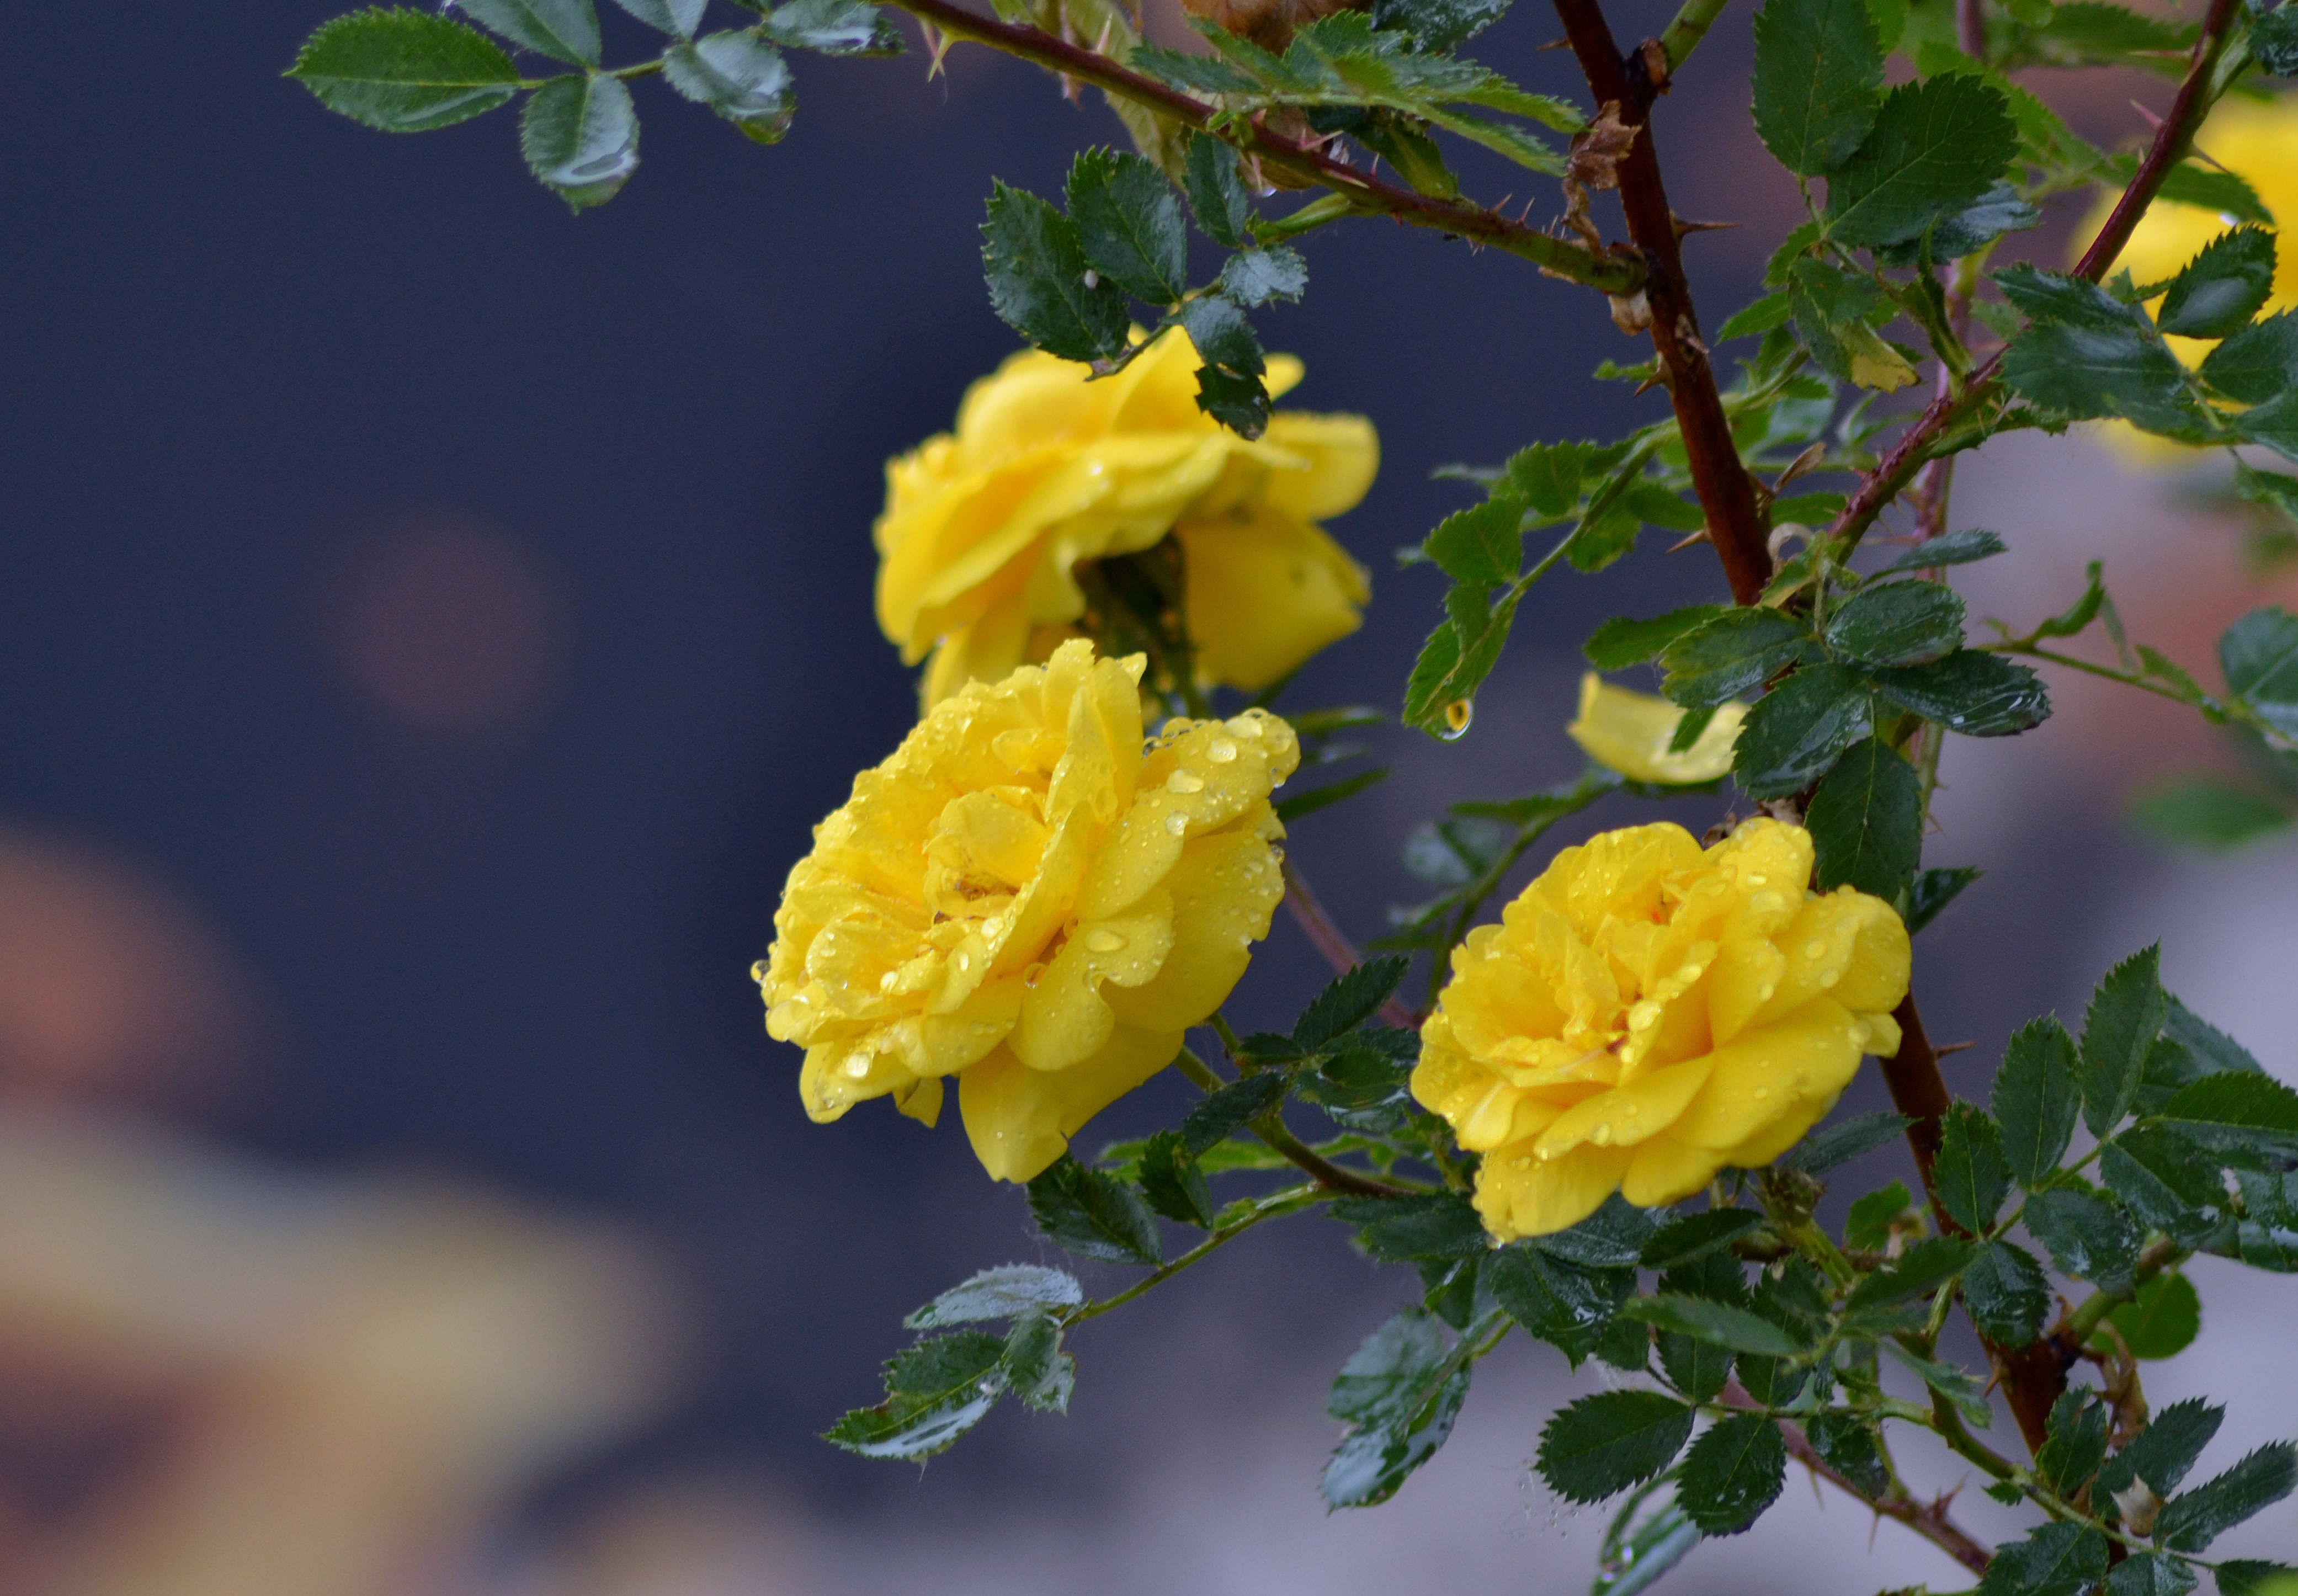 yellow roses, roses, flowers, drops, branch lock screen backgrounds